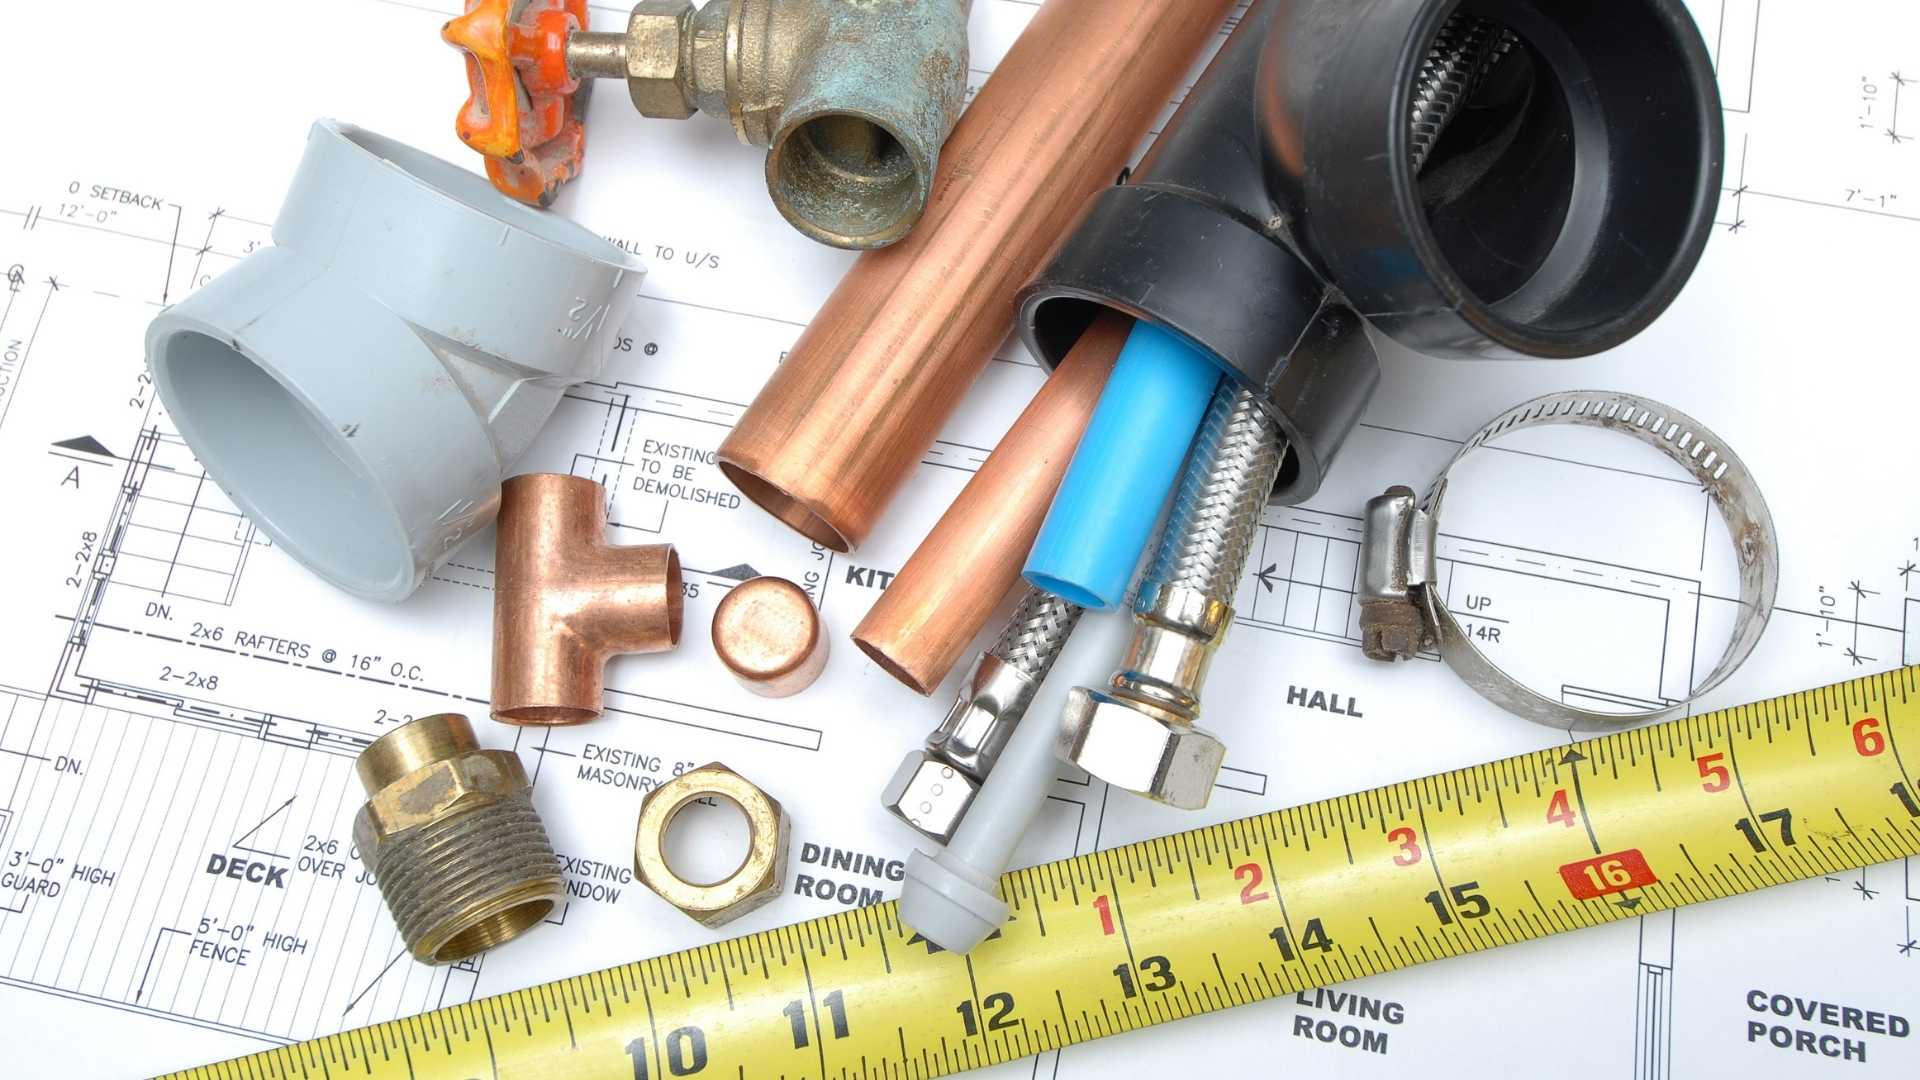 plumbing plans and supplies